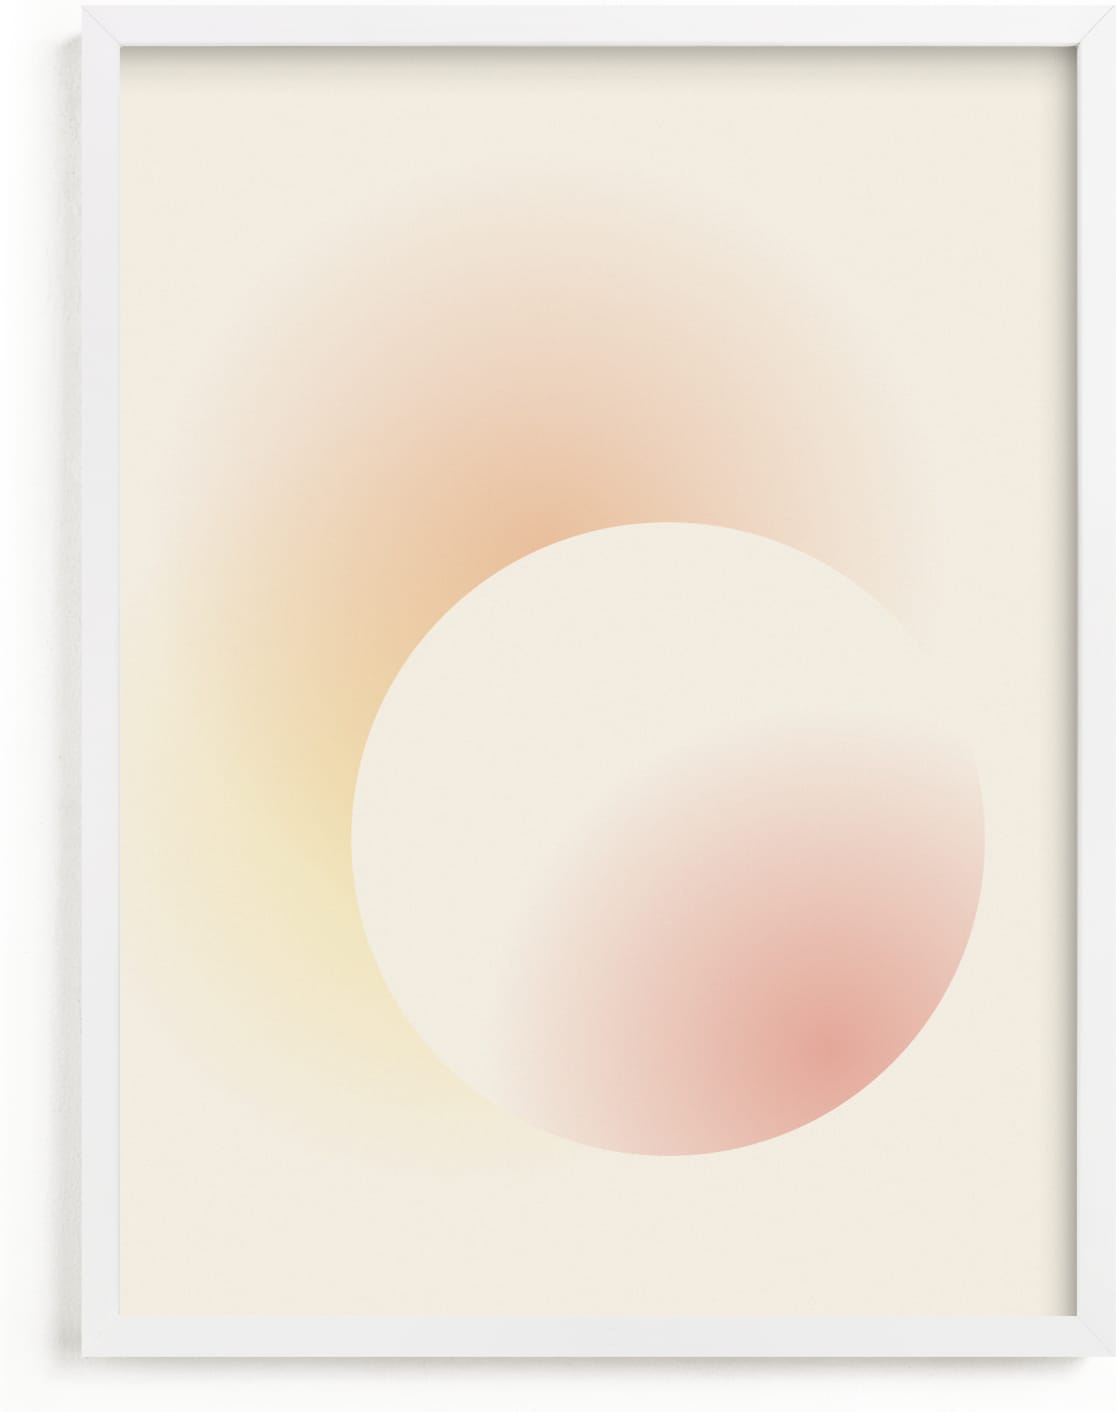 This is a yellow, pink, beige kids wall art by Sarah Lund called Light of the Sun.